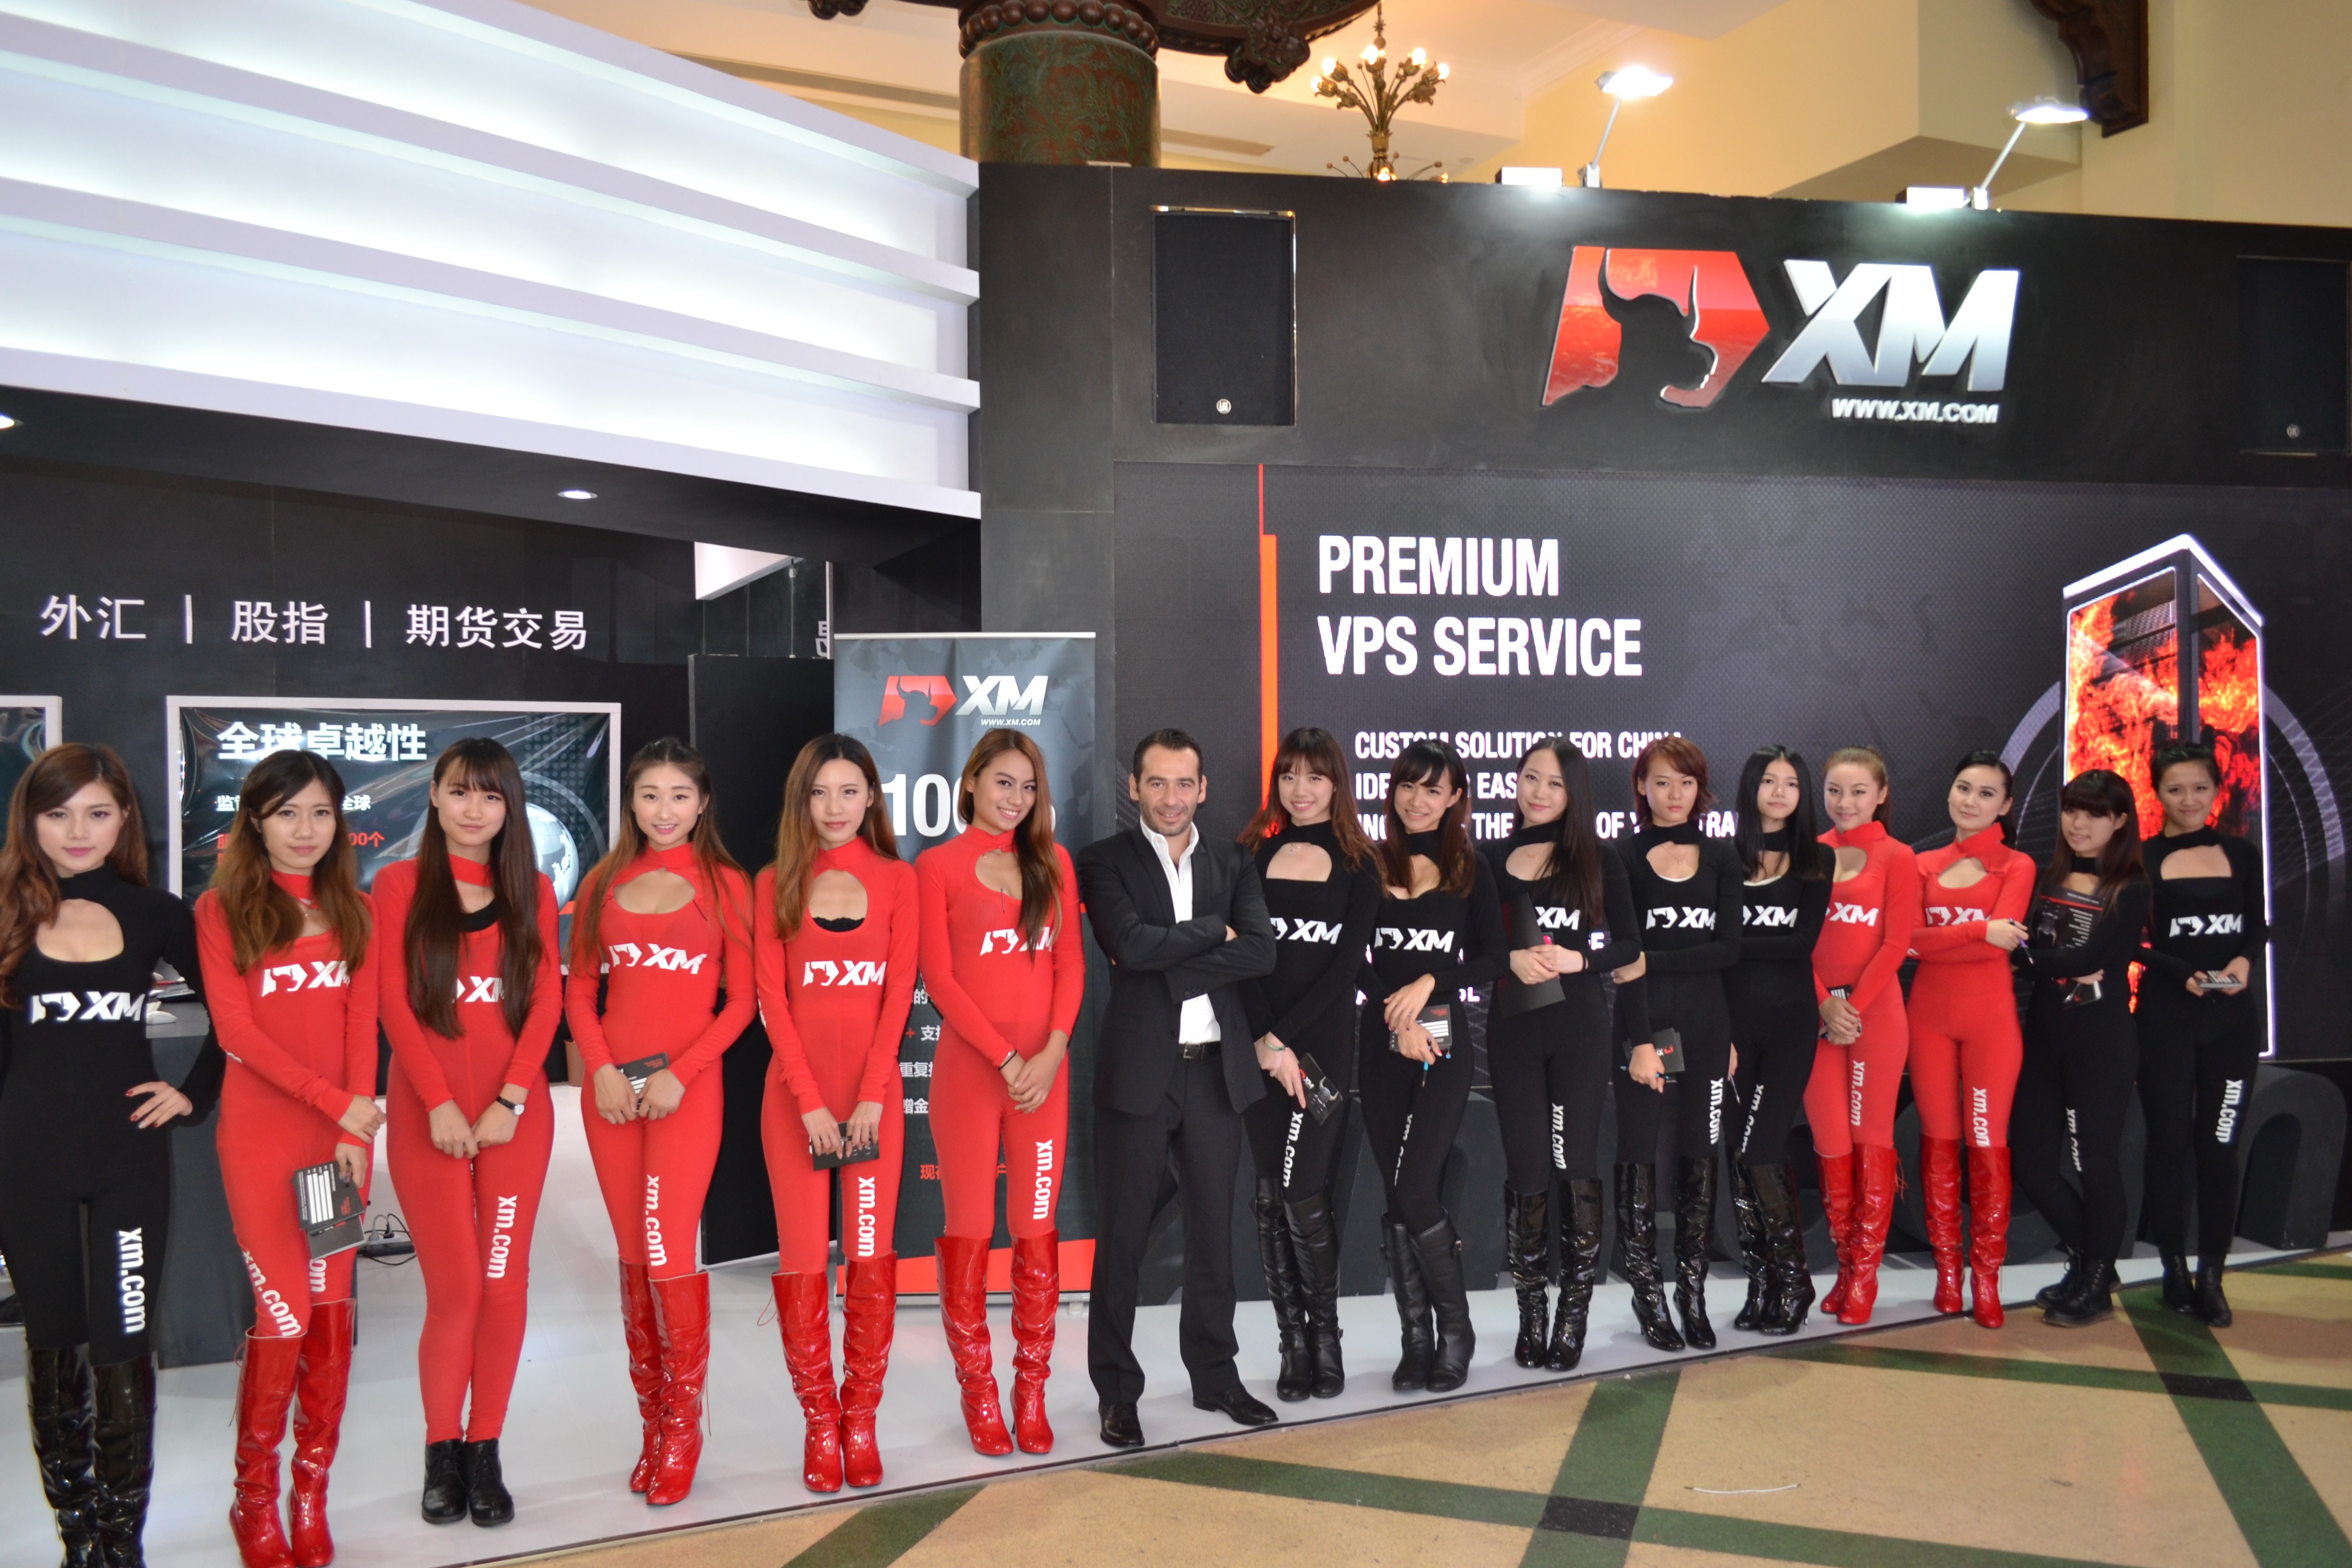 Forex expo